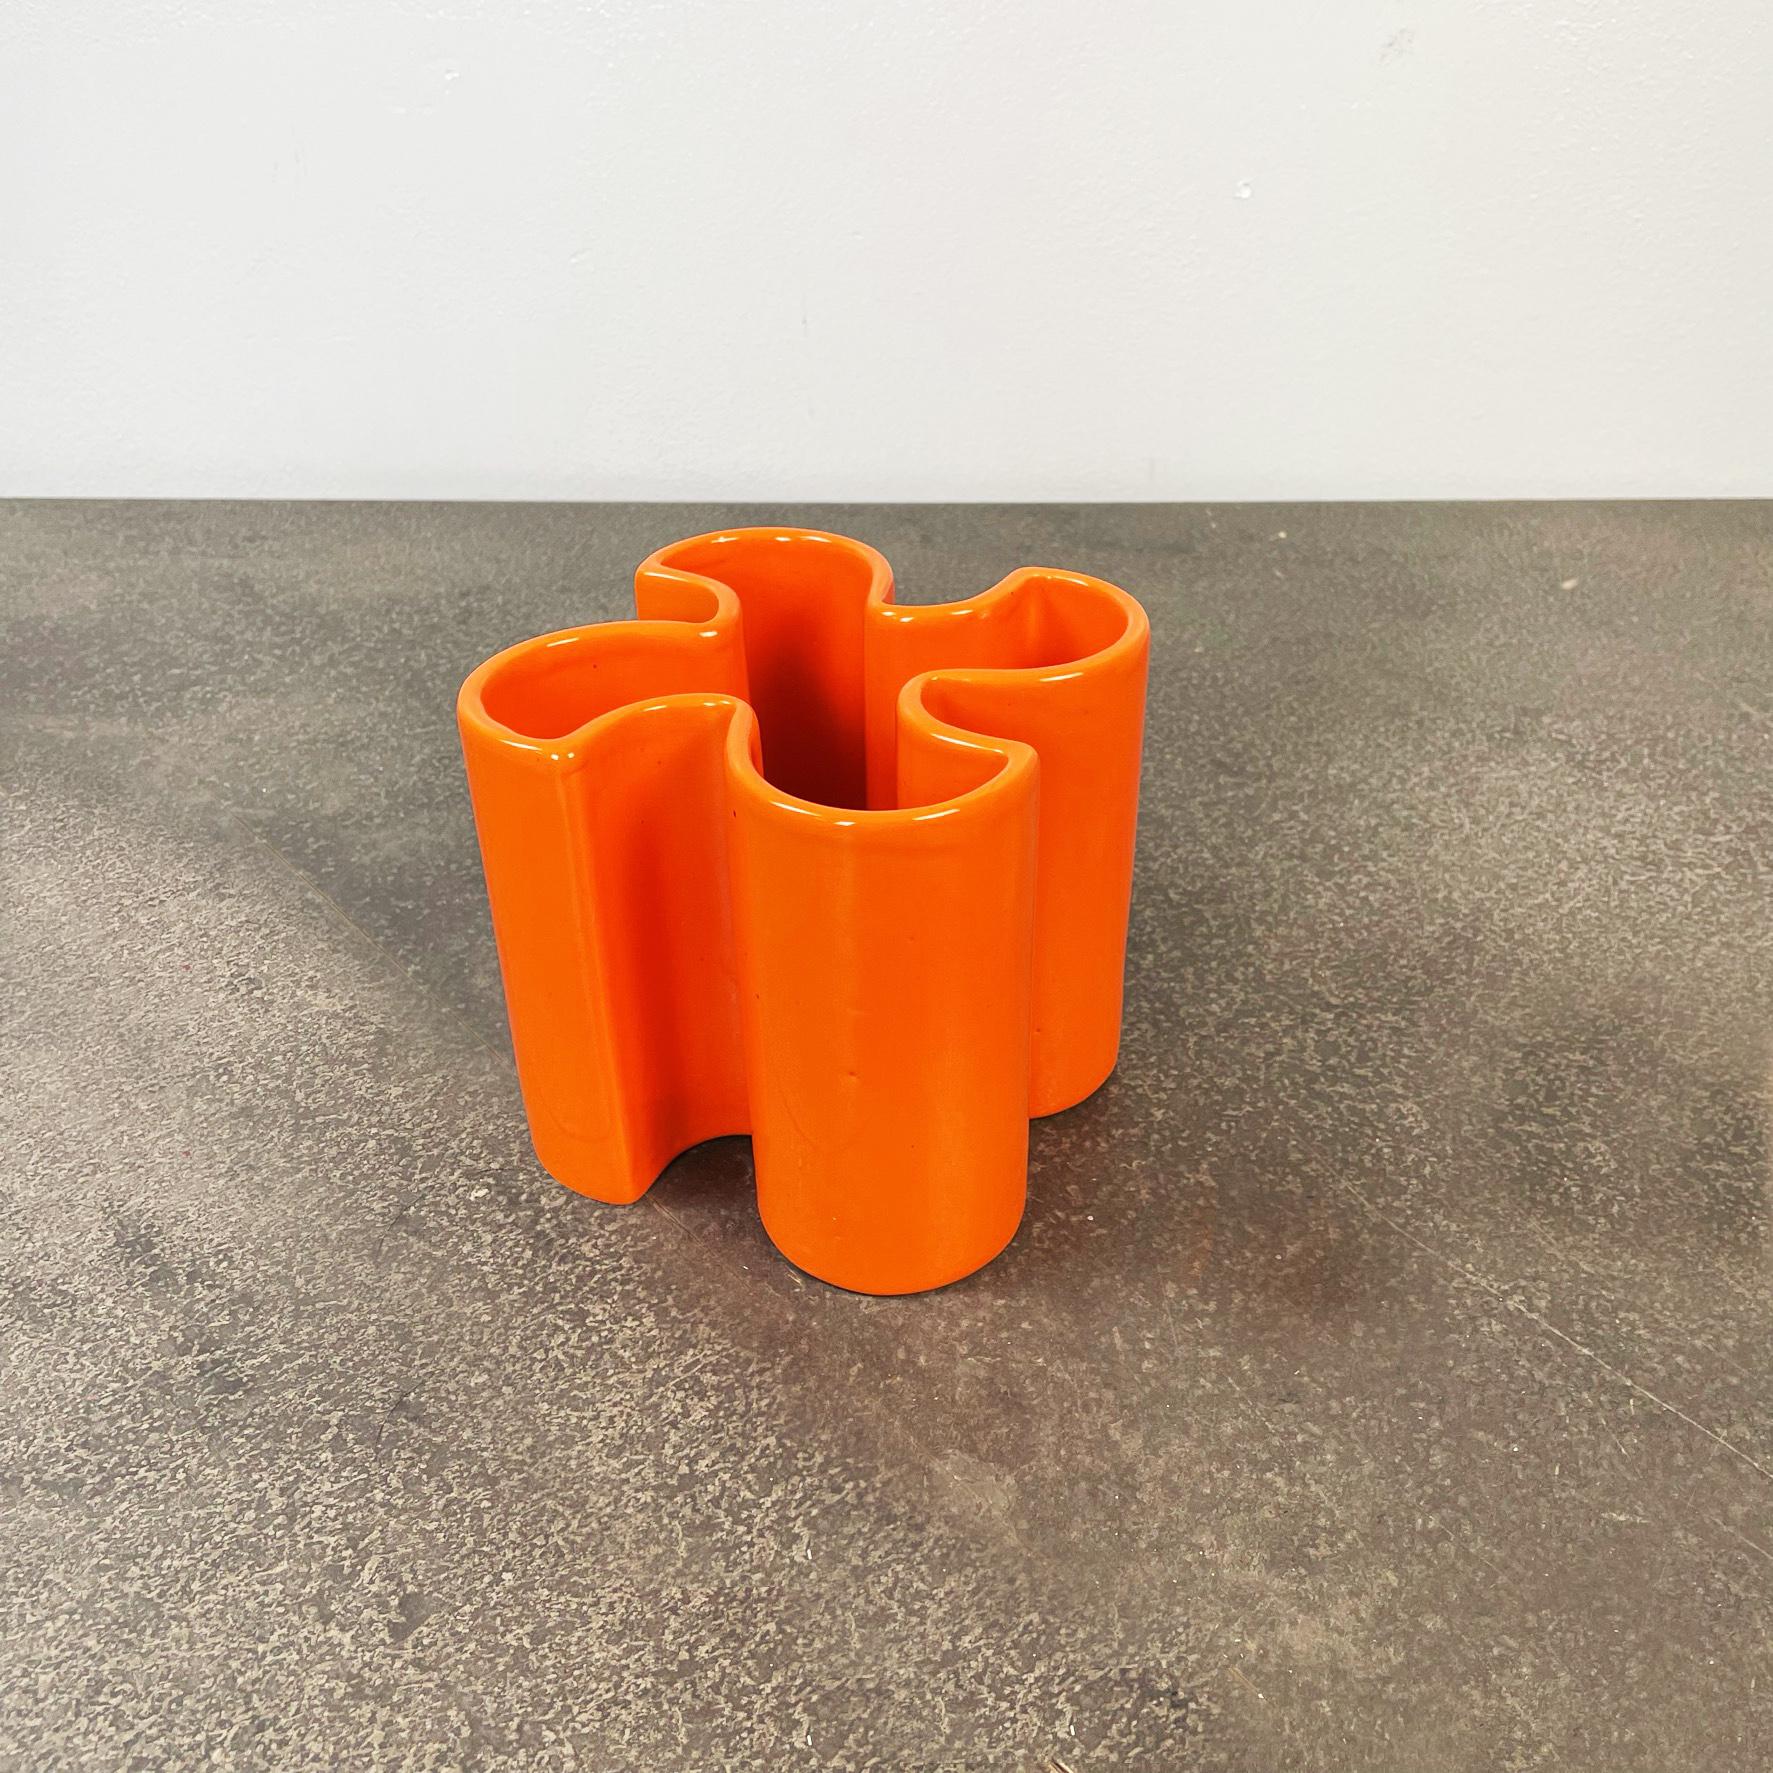 Italian mid-century Orange ceramic Vase by Bettonica for Gabbianelli, 1970s
Vase with a helix shape in orange ceramic.
Produced by Gabbianelli in 1970s and designed by Franco Bettonica.
Very good conditions
Measurements in cm 16x16x30h

Franco